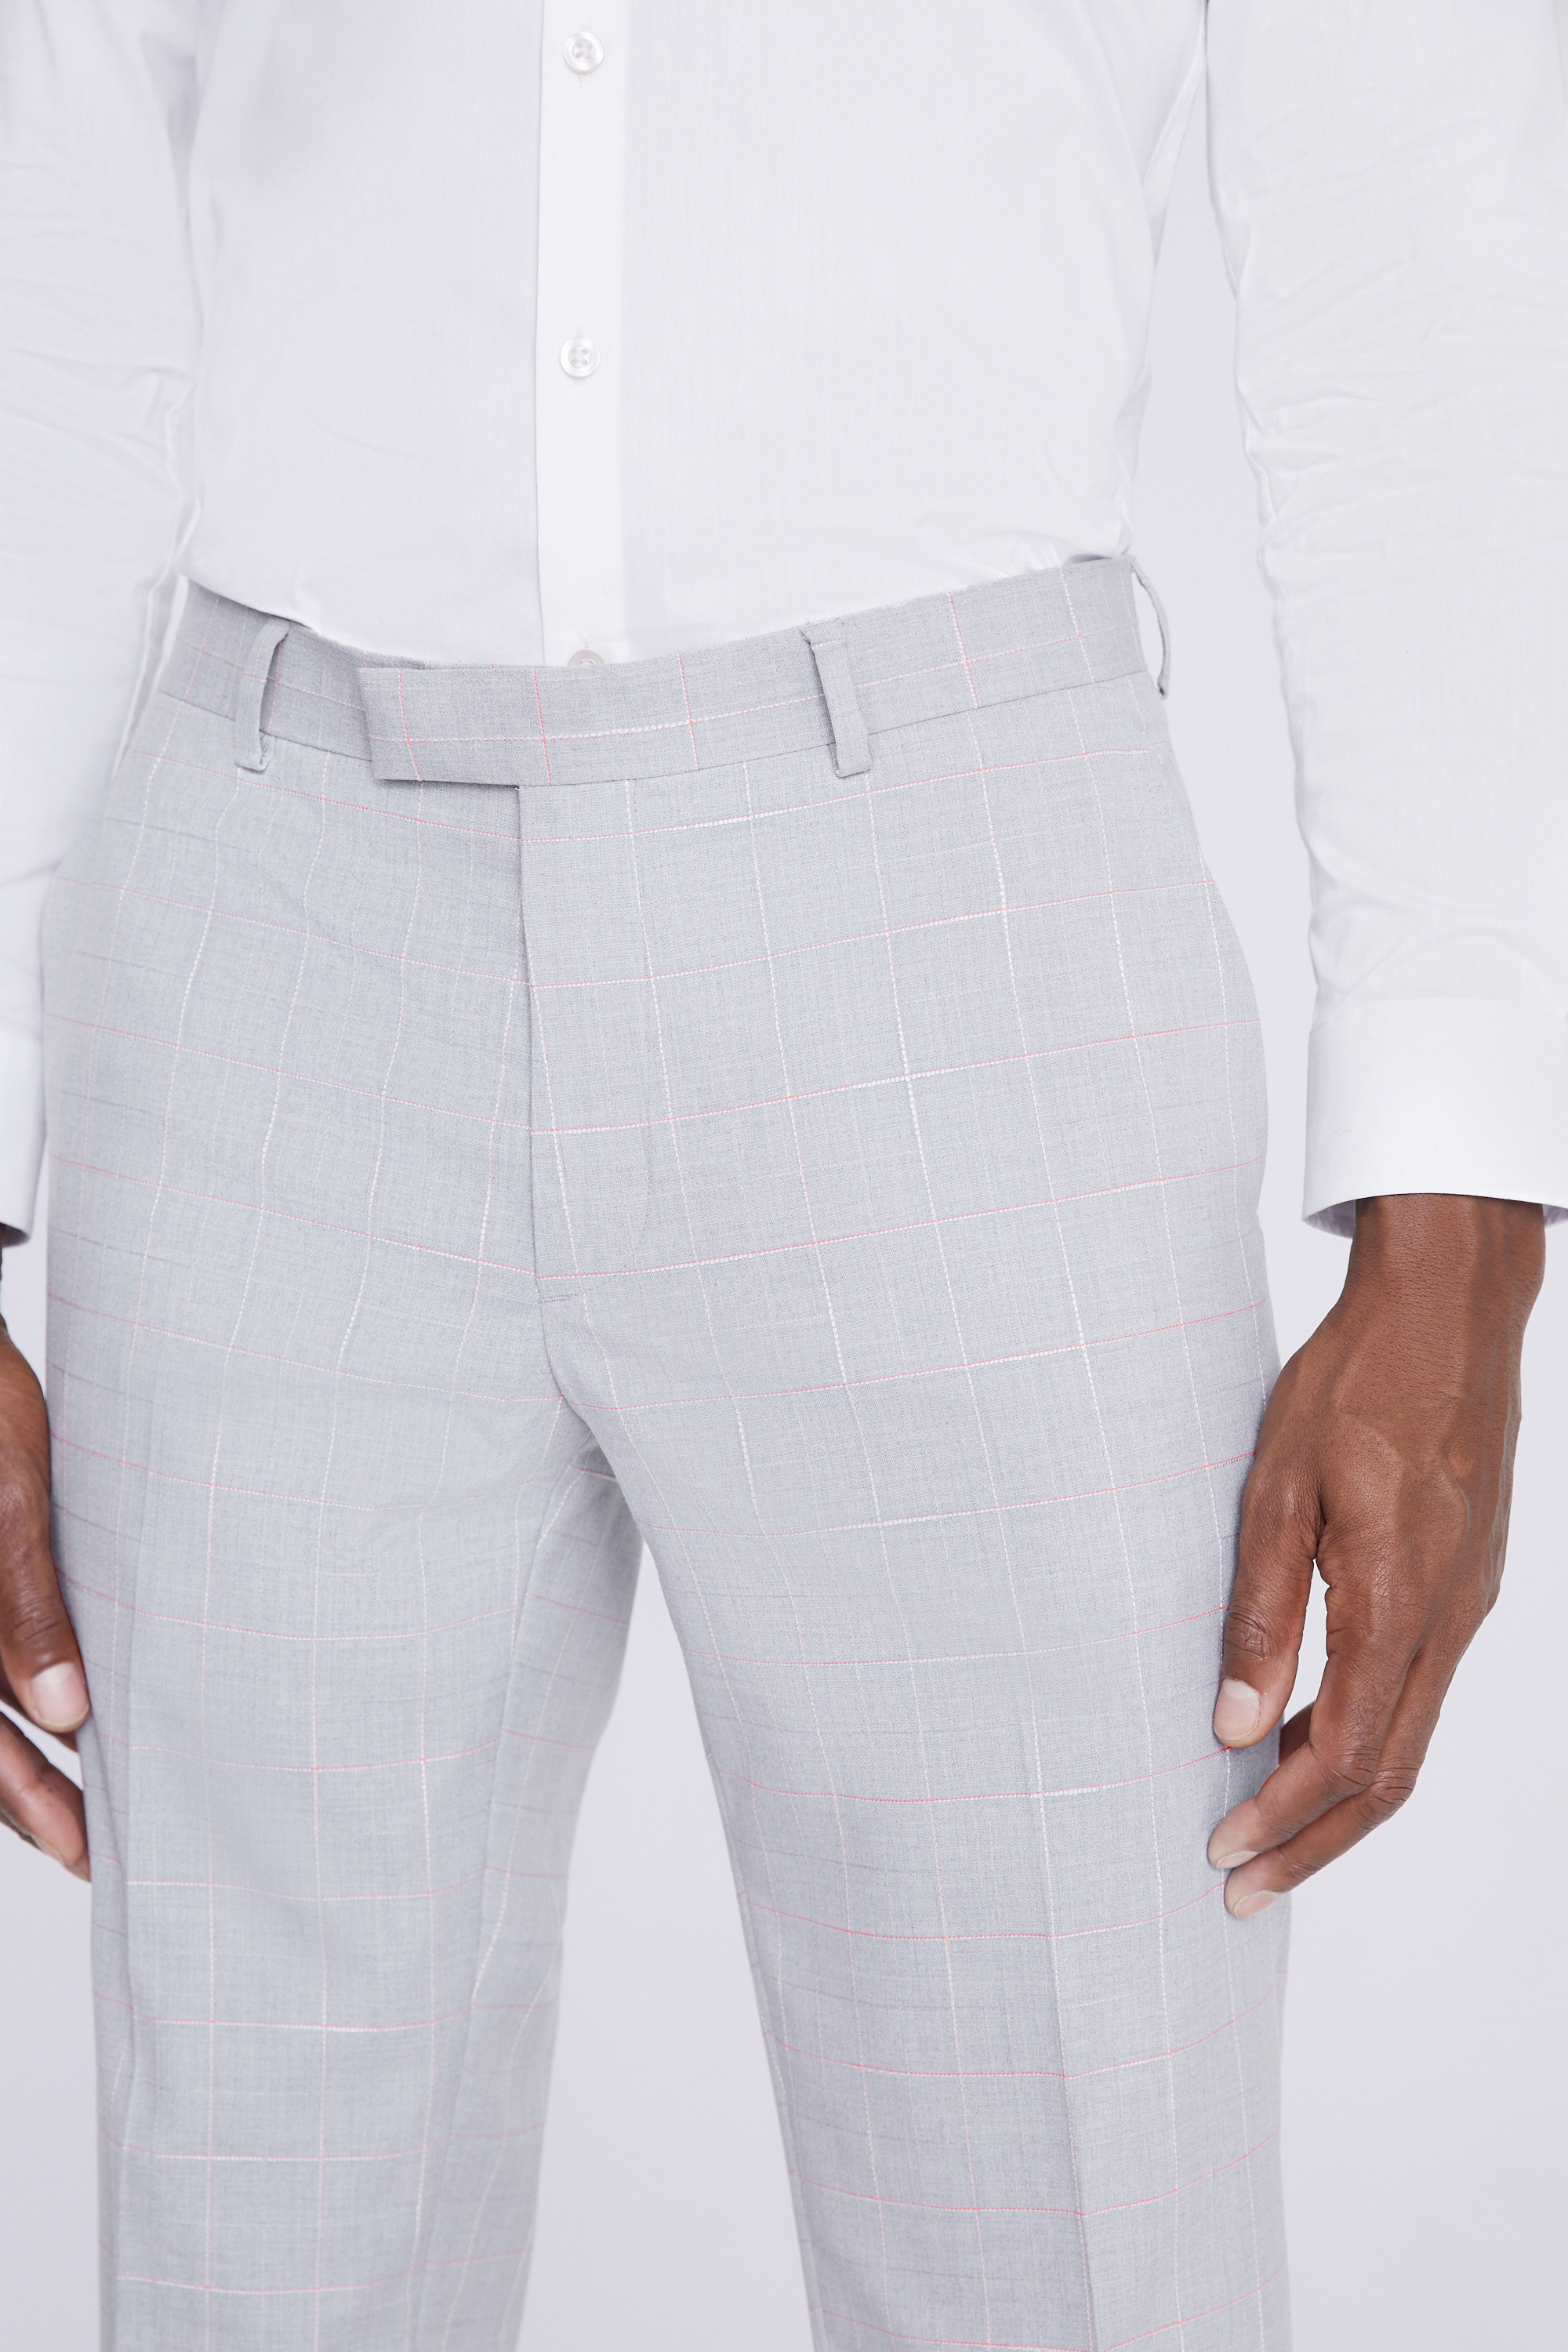 Grey Clementine Check Trousers | Buy Online at Moss